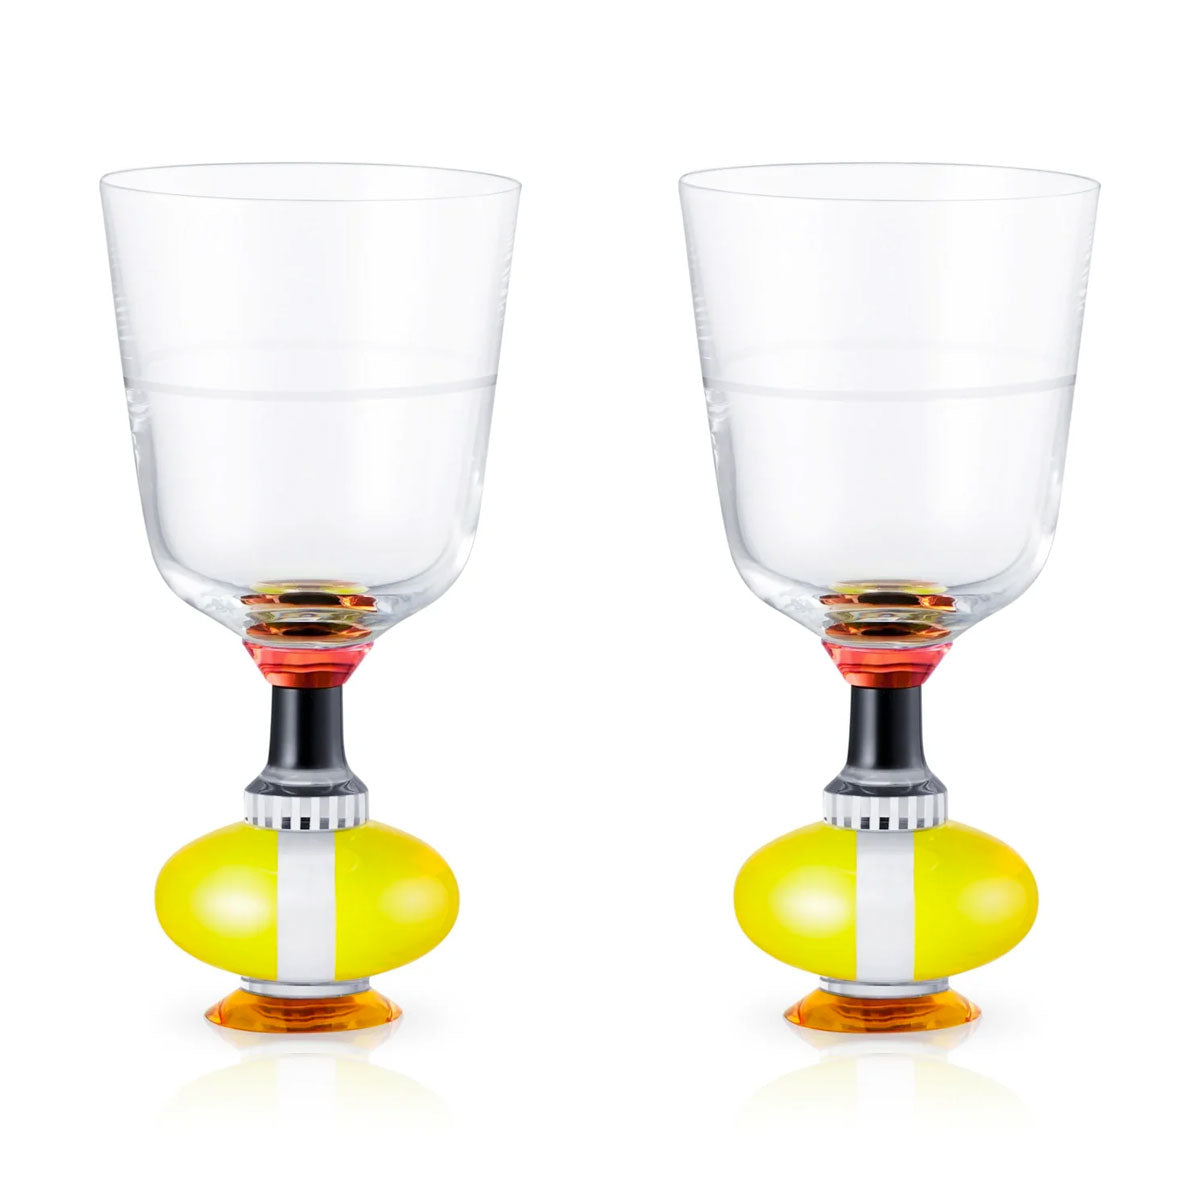 Richmond Short Crystal Glasses Set of 2 Clear/Black/Coral/Yellow - Reflections Copenhagen